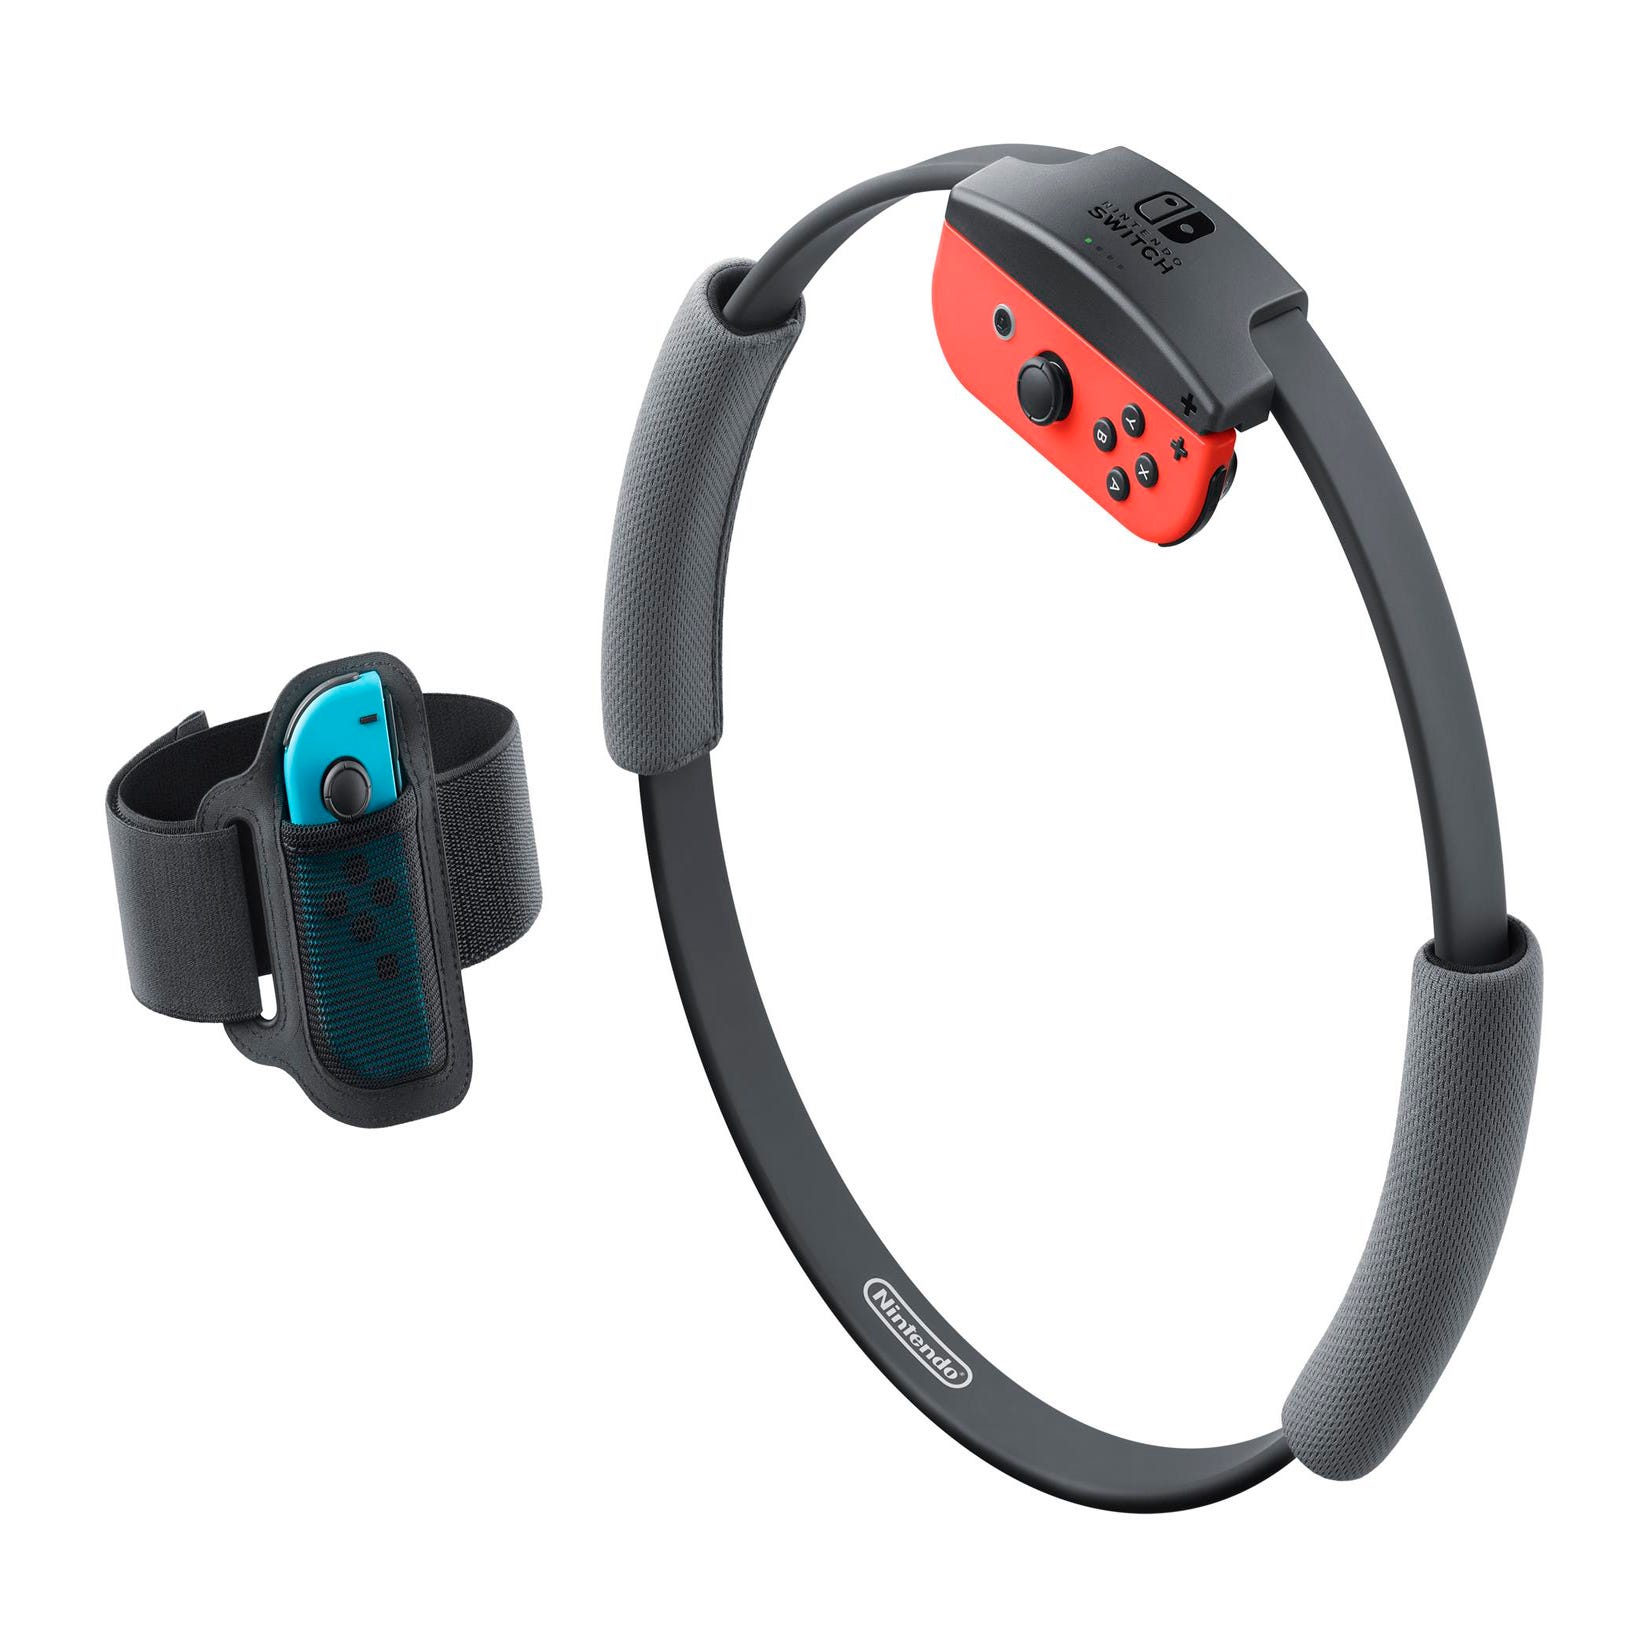 Fix Your Leg Strap Problems In Ring Fit Adventure! Nintendo Switch Leg  Strap Troubleshooting Guide! 